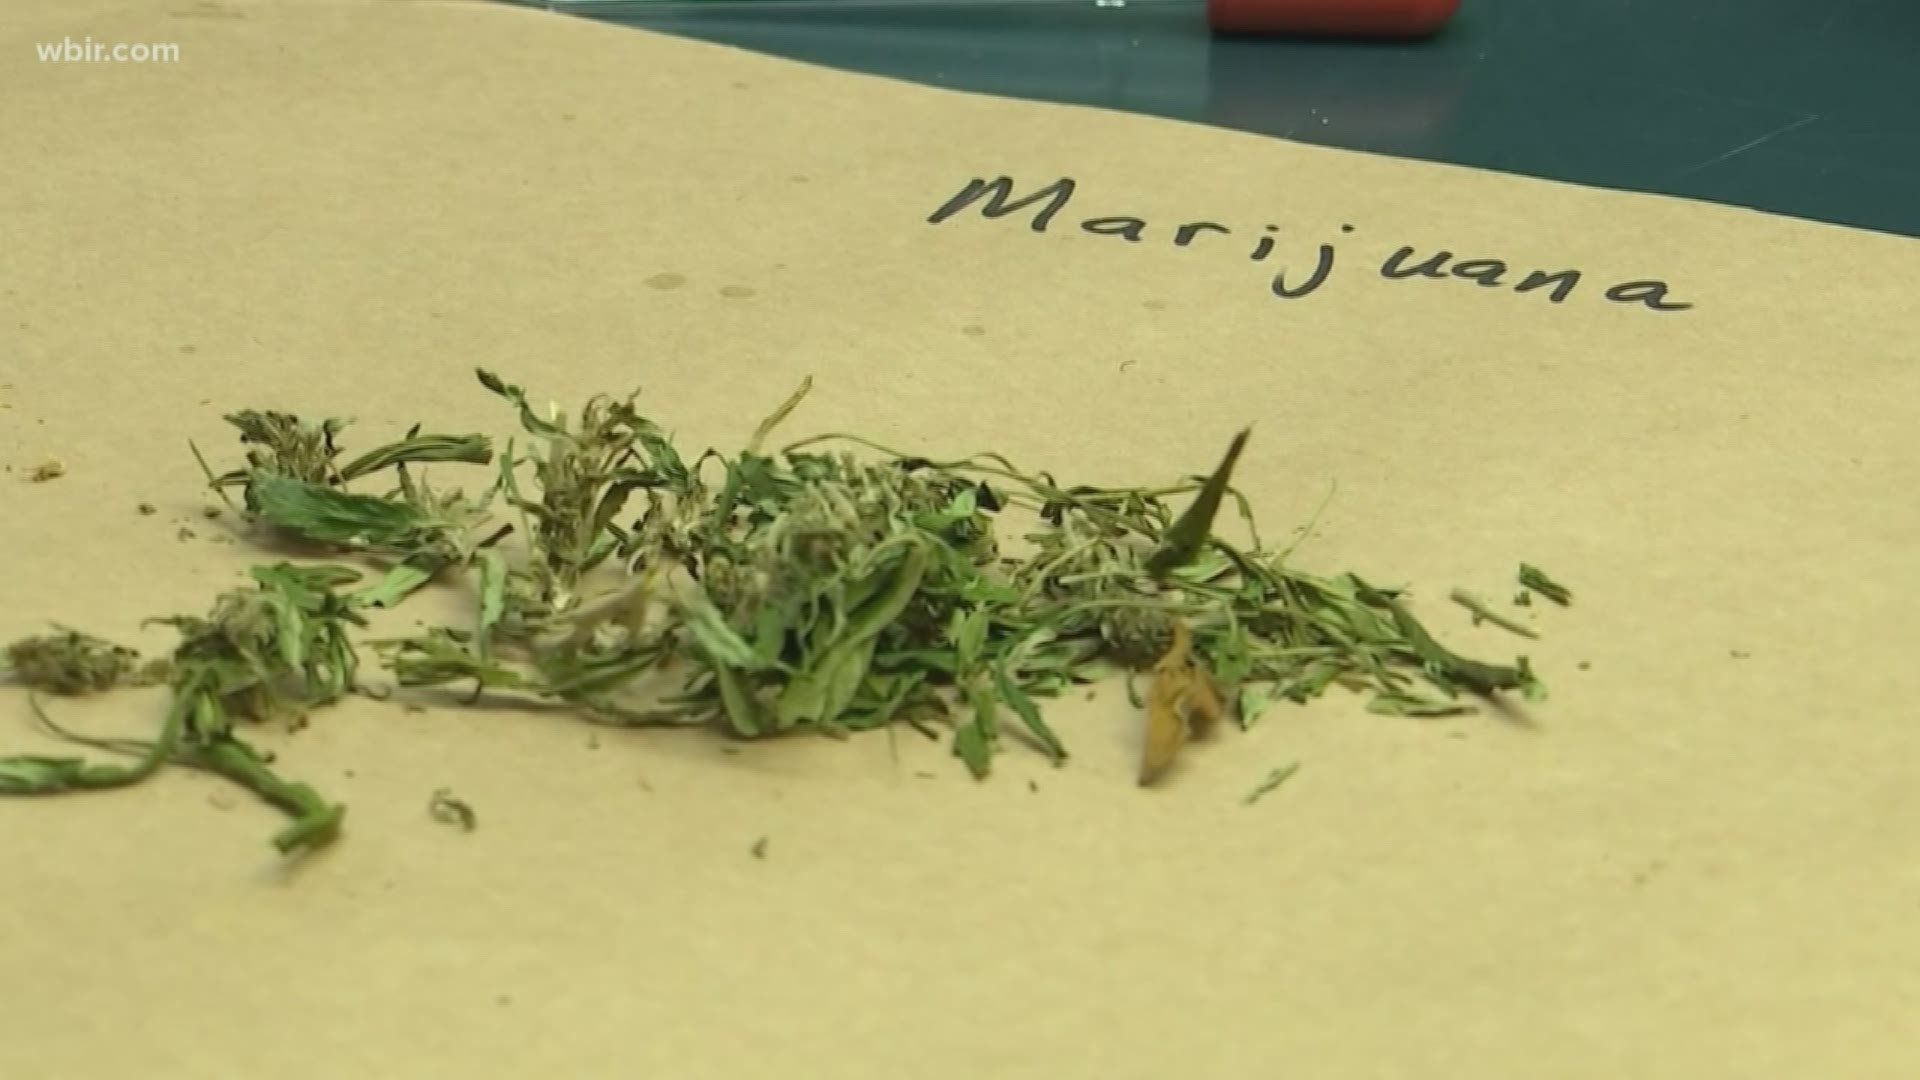 The TBI processes about 10,000 marijuana-related cases across Tennessee.